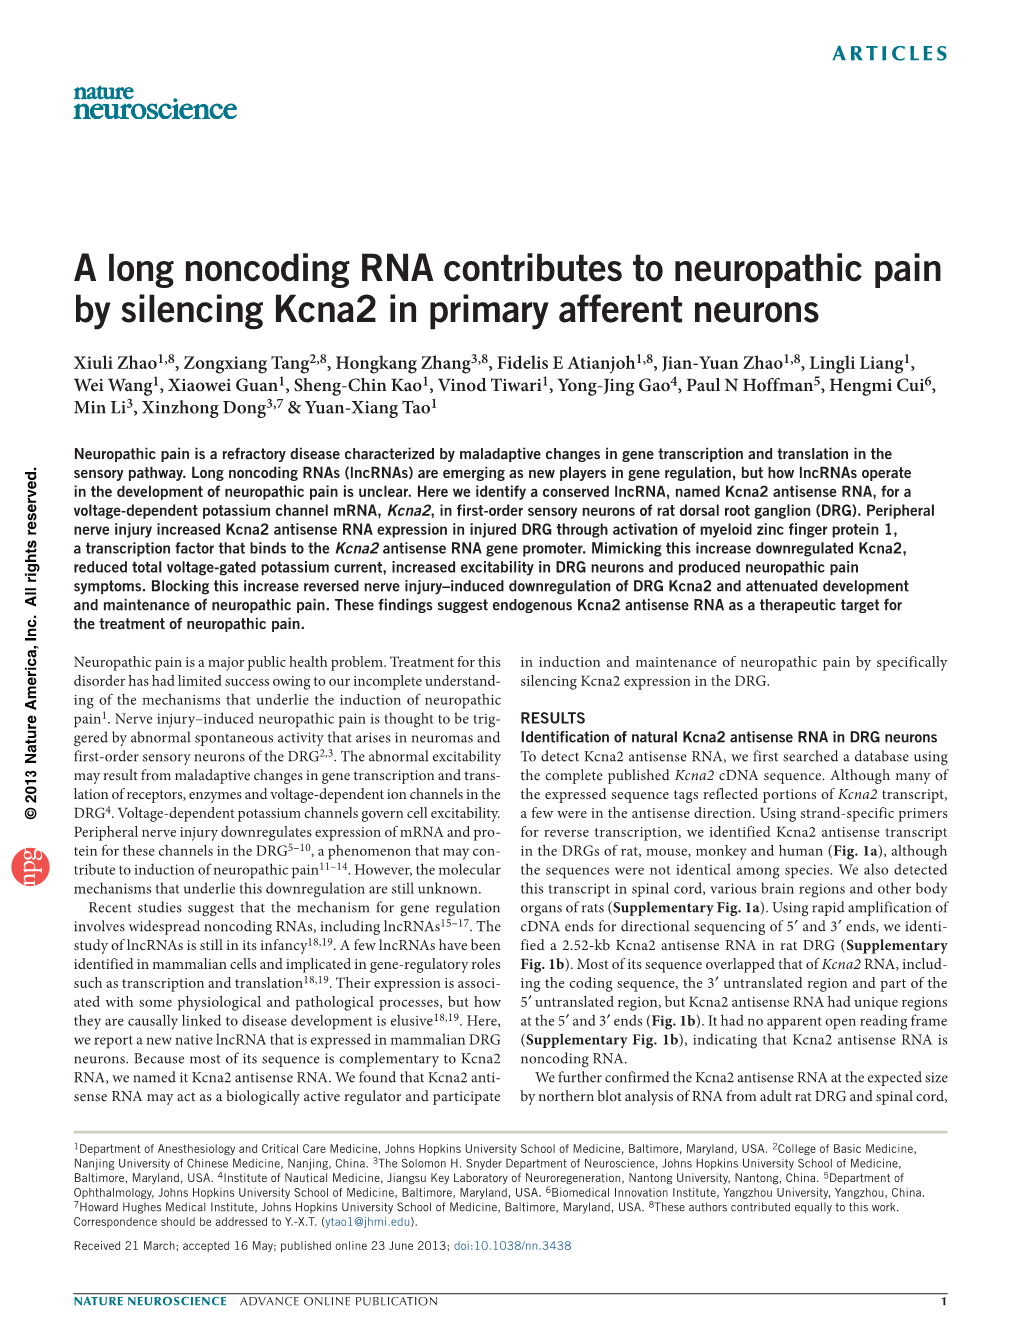 A Long Noncoding RNA Contributes to Neuropathic Pain by Silencing